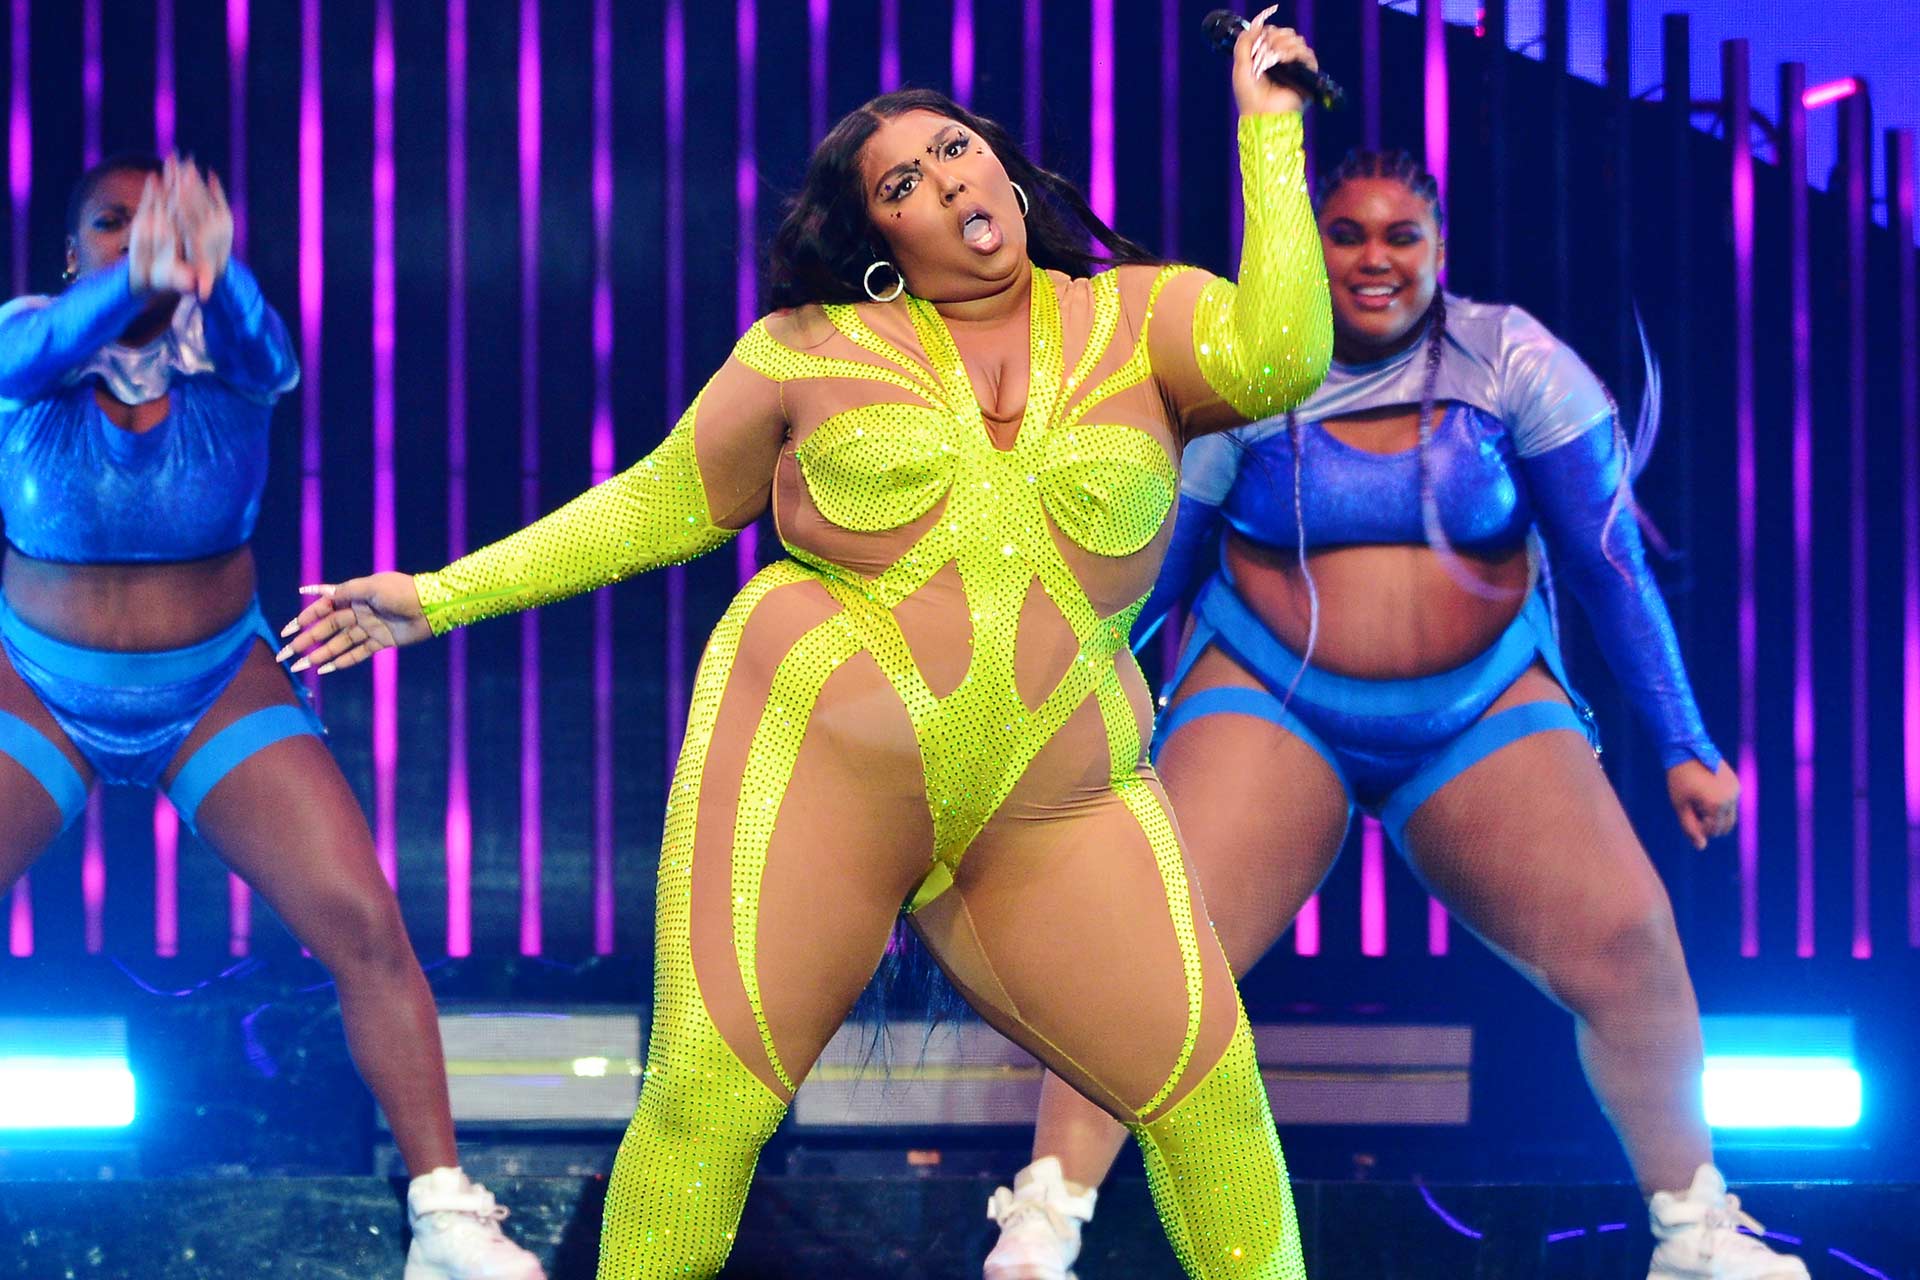 Lizzo performing in a Mugler body suit